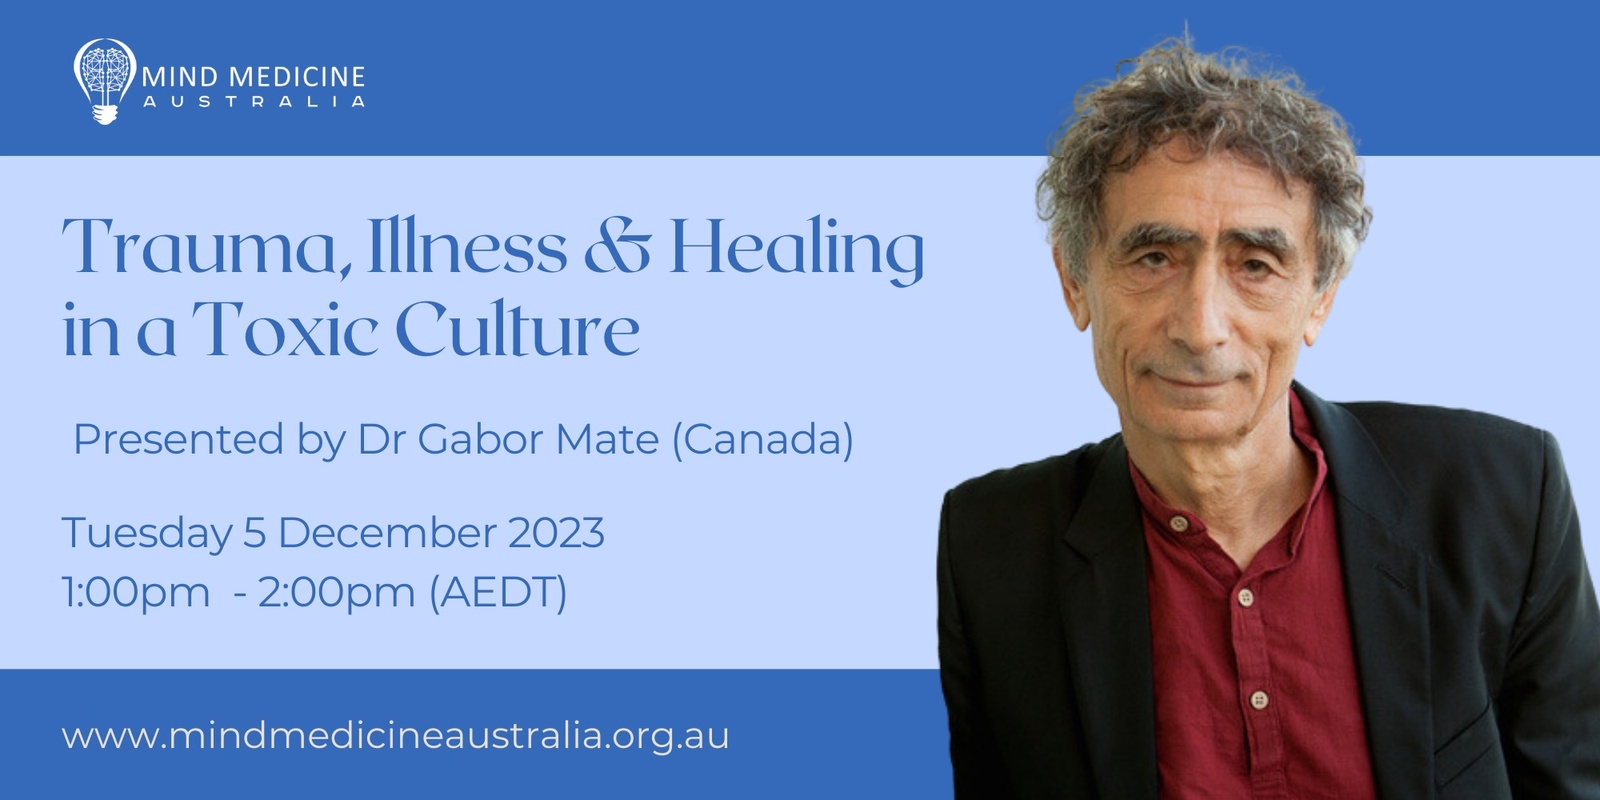 Trauma, Illness & Healing in a Toxic Culture presented by Dr Gabor Mate (Canada)